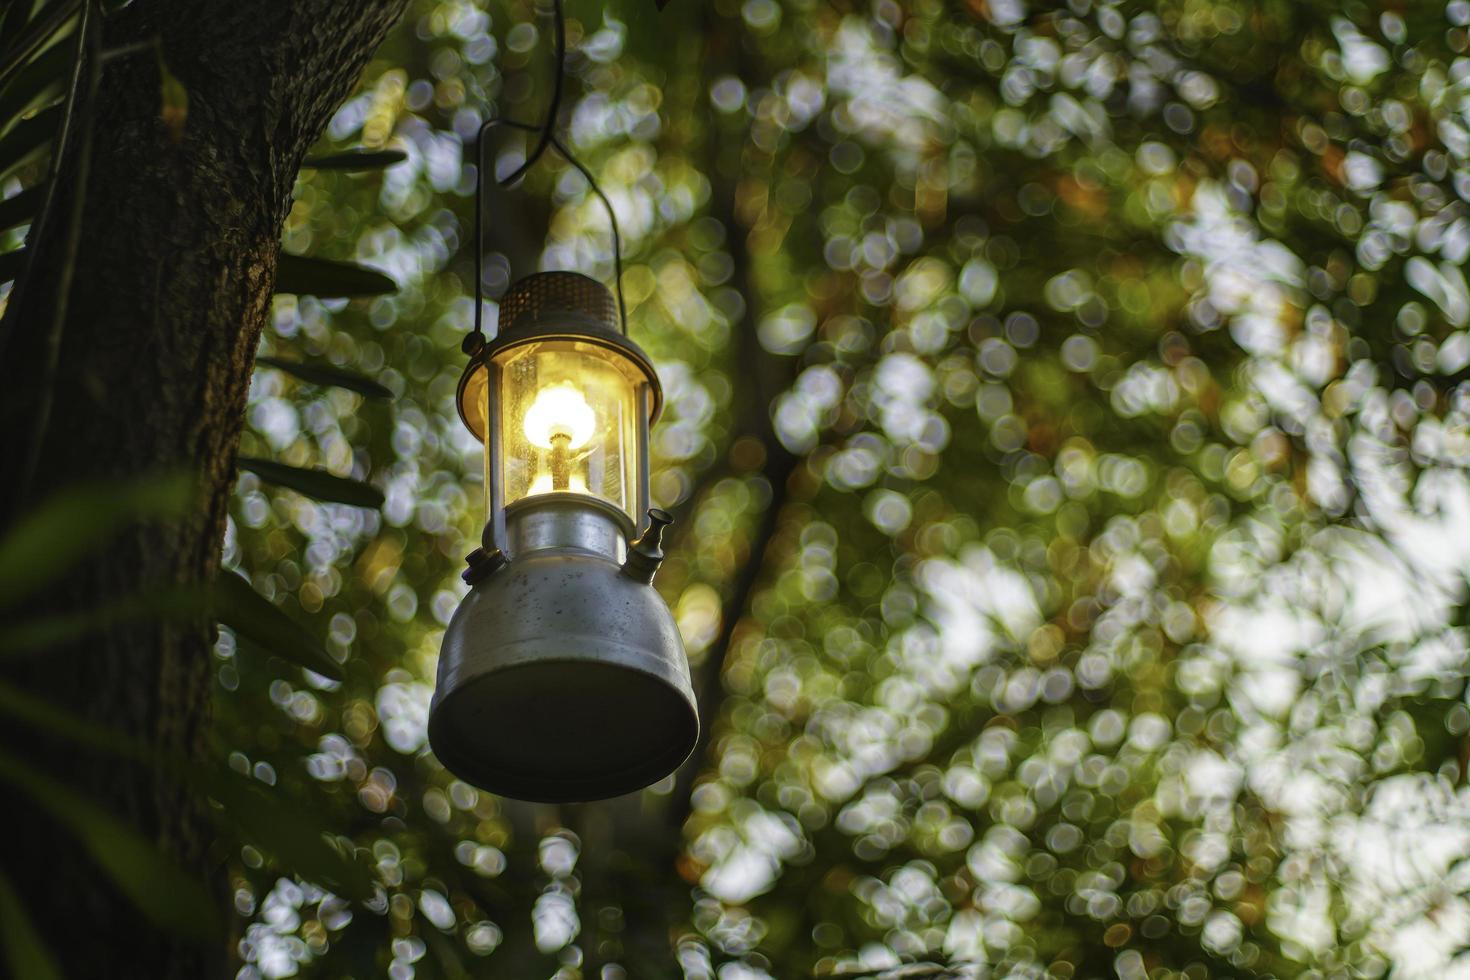 antique oil lamp hanging on a tree in the forest in the evening camping atmosphere.Travel Outdoor Concept image.soft focus. photo